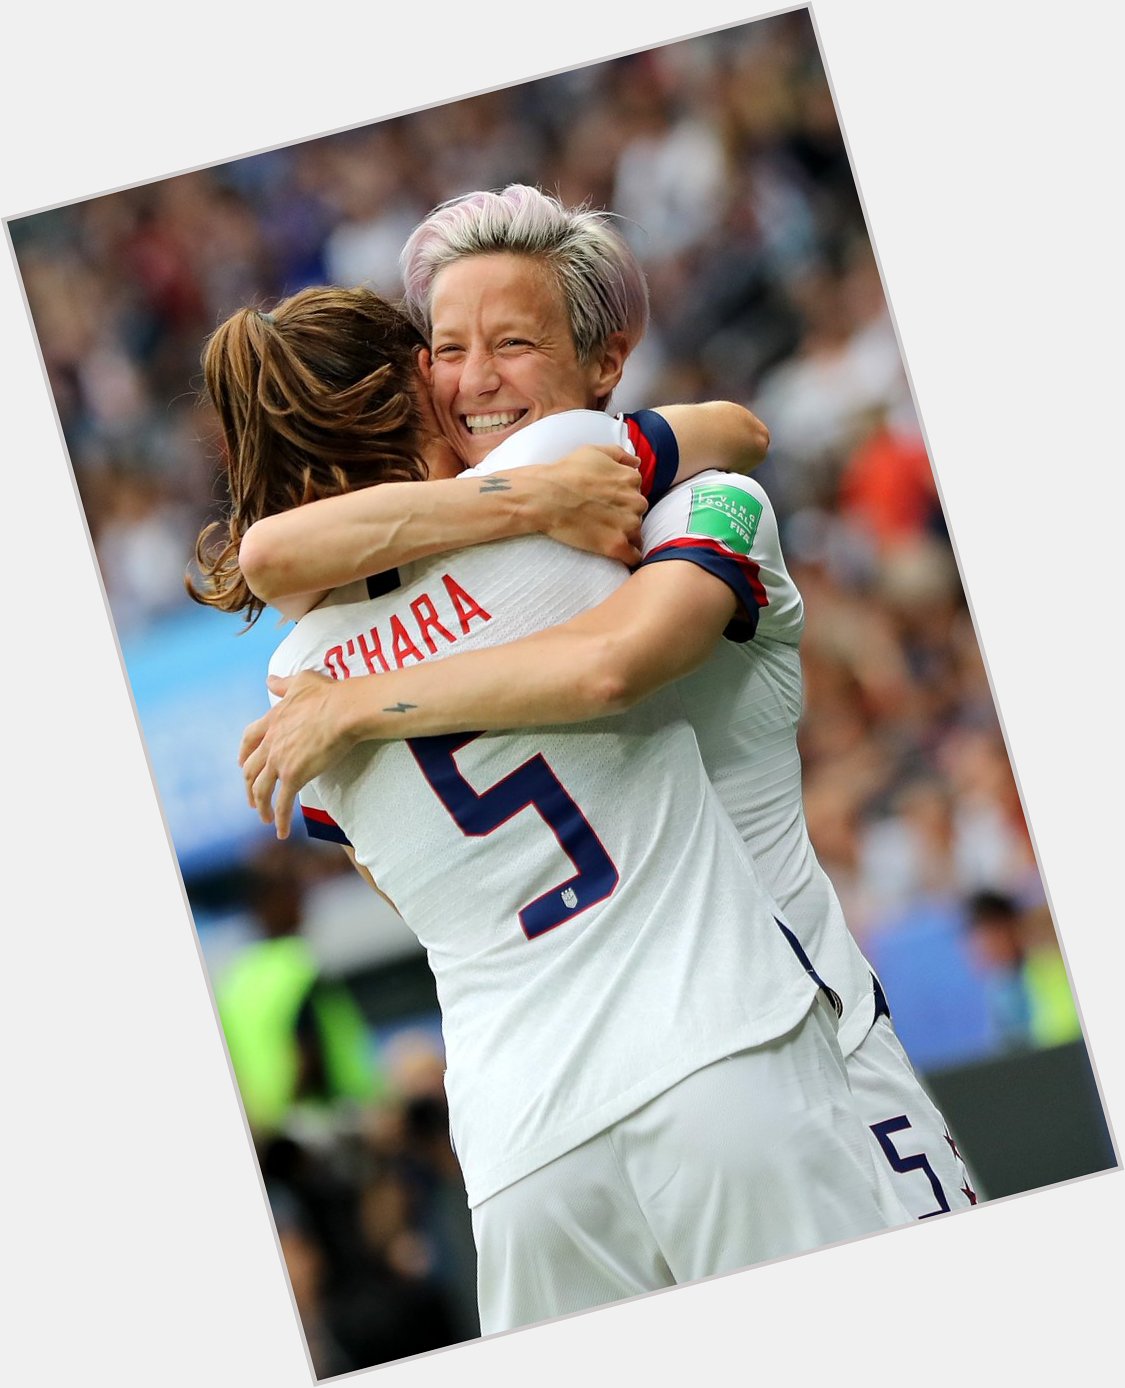 Happy birthday, Megan Rapinoe! Wonder what the perfect present for her this weekend would be  